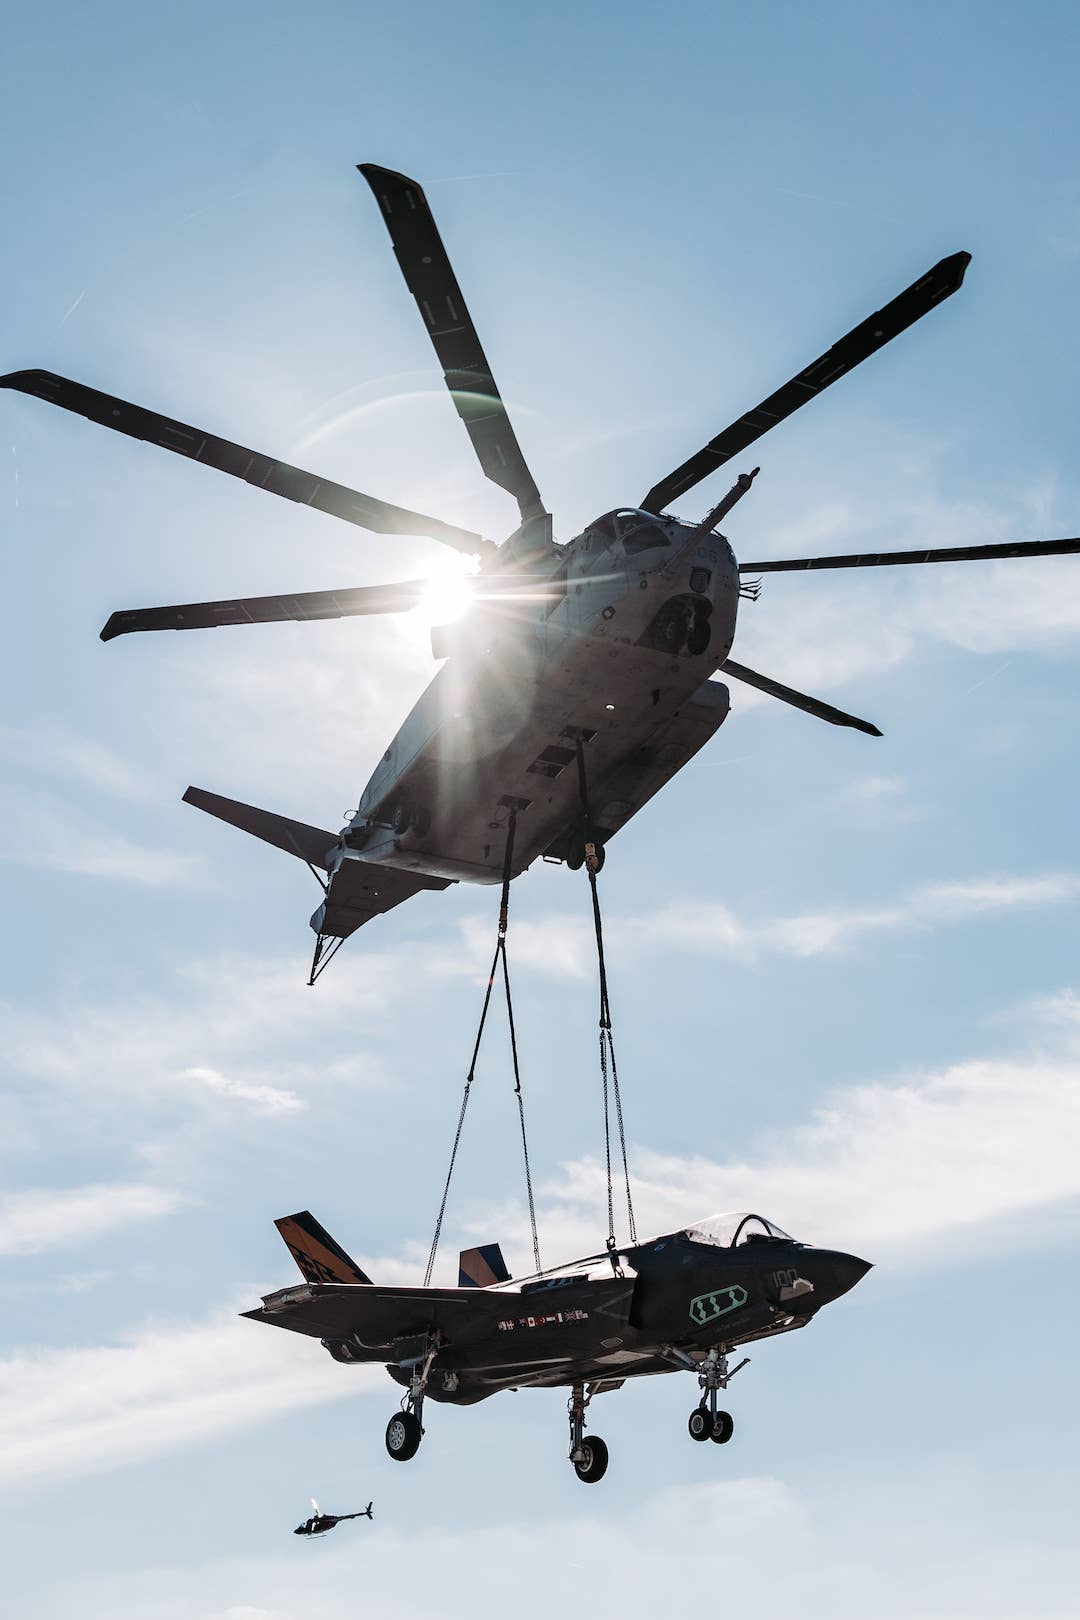 A CH-53K King Stallion with Marine Operational Test and Evaluation Squadron one (VMX-1), lifts an F-35C Lightning II during Helicopter Support Team operations. <em>U.S. Marine Corps photo by Cpl. Meshaq Hylton</em>